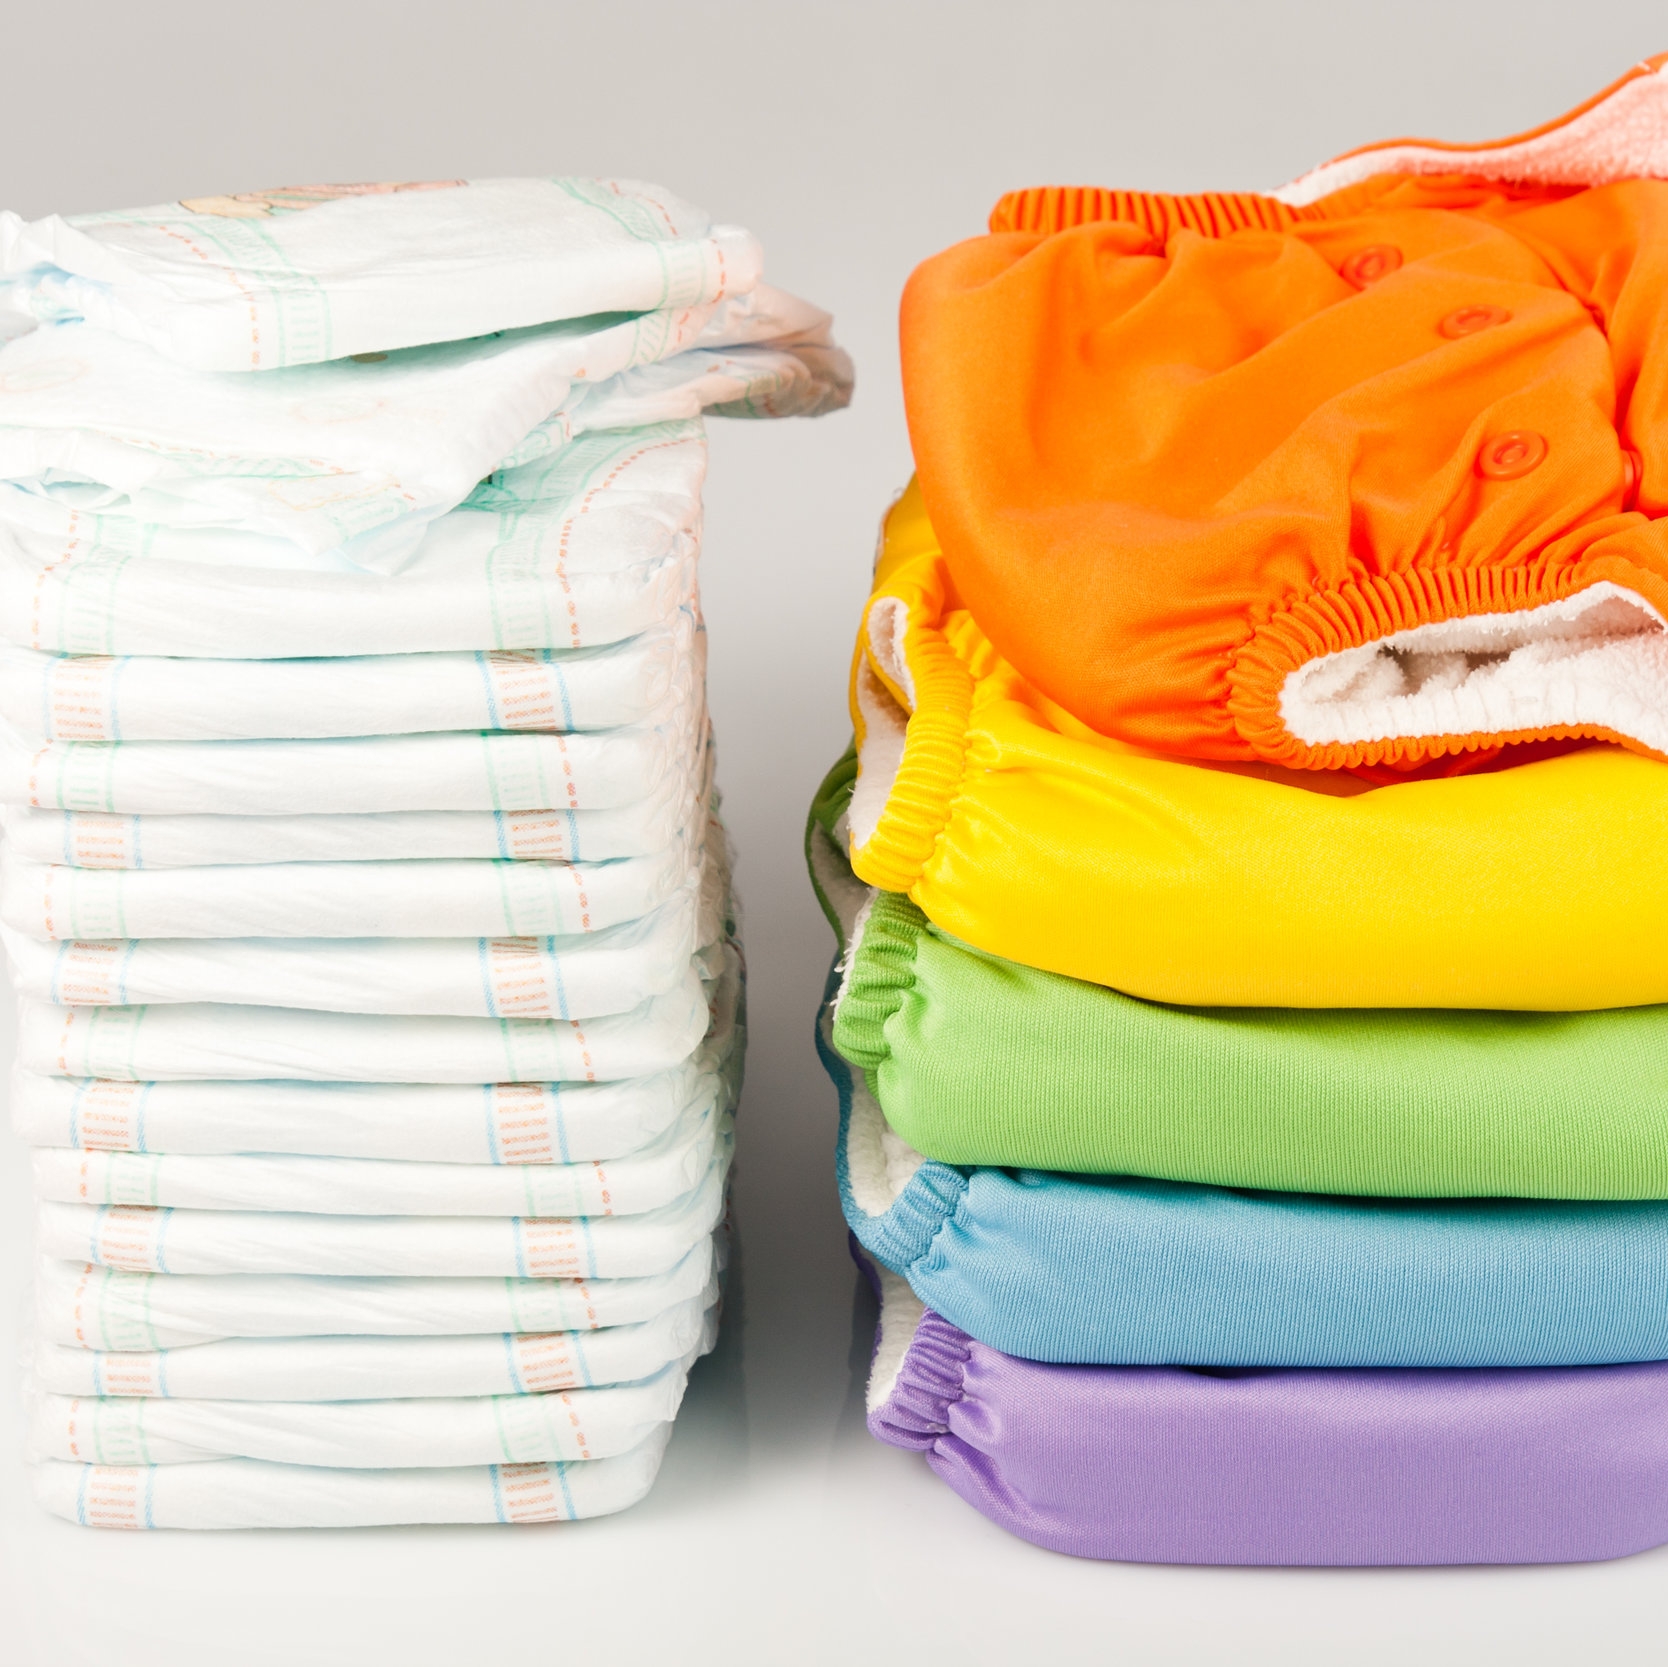 DIAPERING/Diapers — Getting Ready For Baby